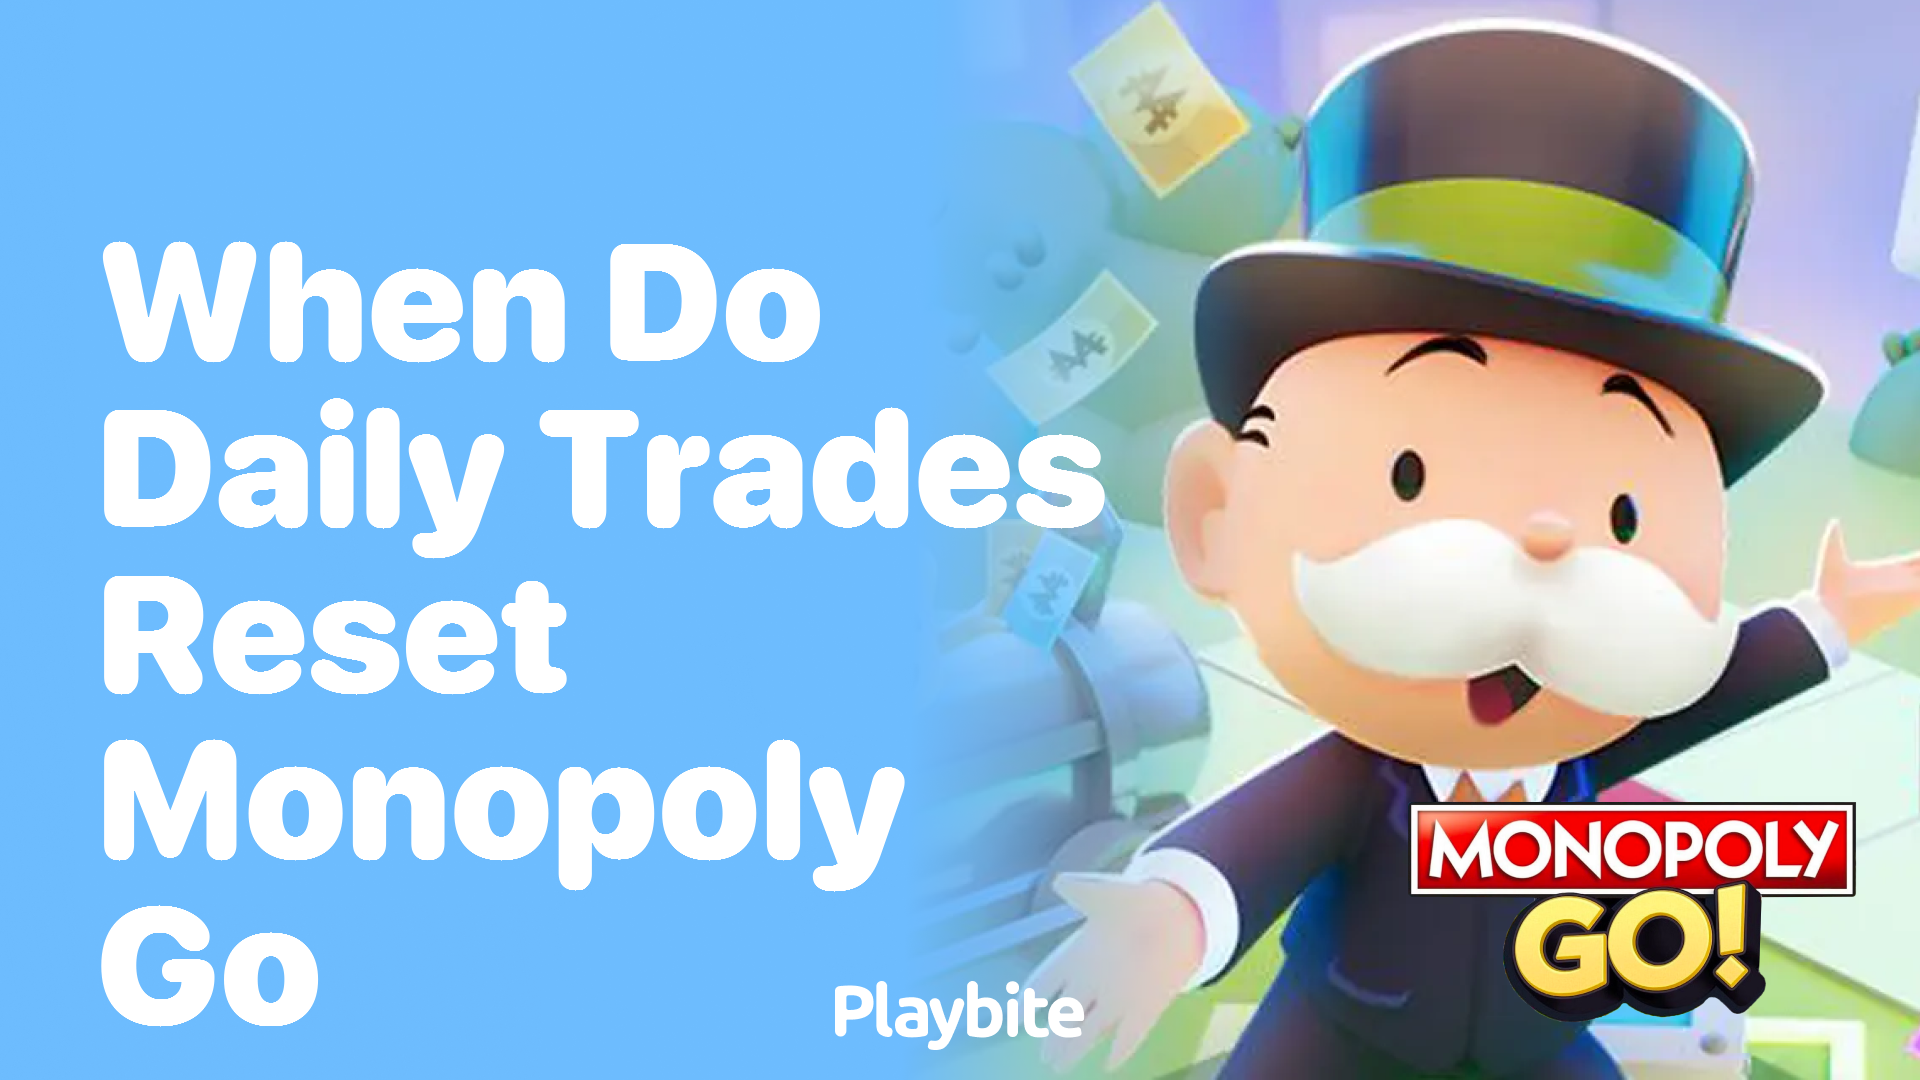 When Do Daily Trades Reset in Monopoly Go?